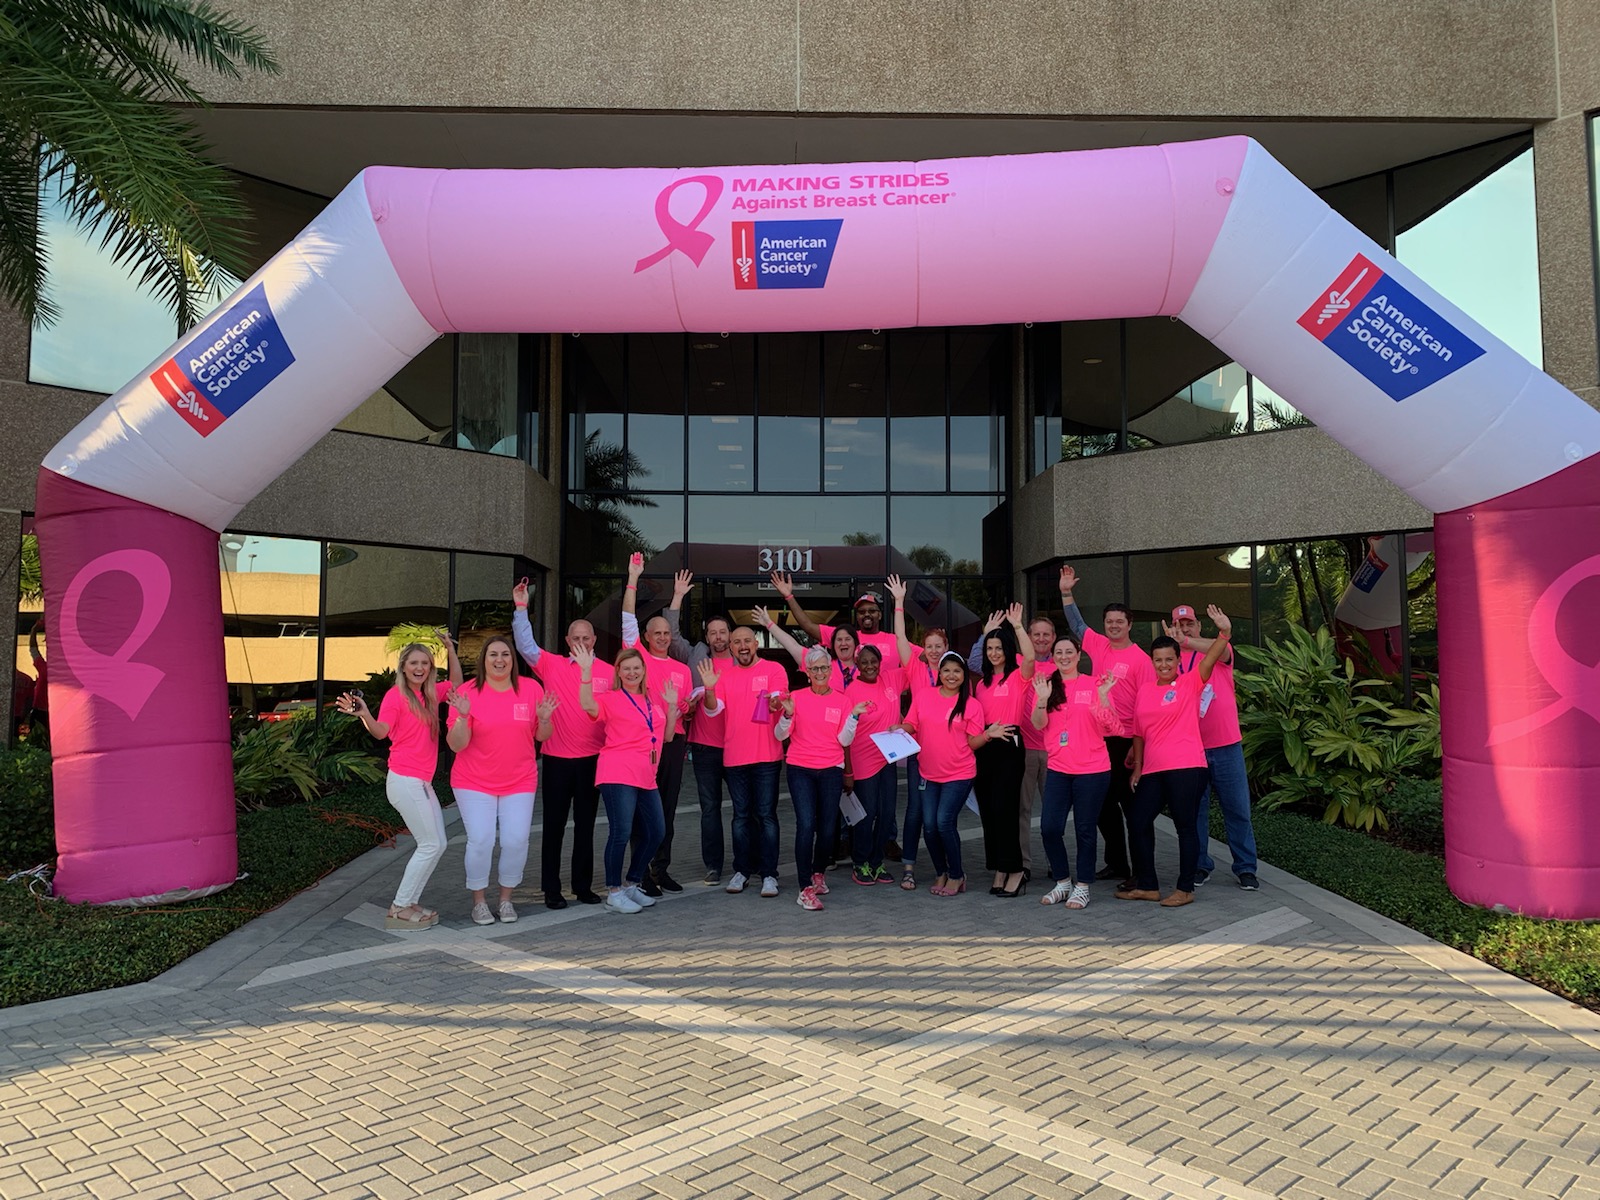 Ultimate Medical Academy (UMA) team members kick off their annual "Making Strides Against Breast Cancer" initiatives in front the institution's online campus headquarters in Tampa, Fla. The non-profit healthcare education institution built the nation's largest team of participants with more than 1,150 people walking in the American Cancer Society's 2019 event. 